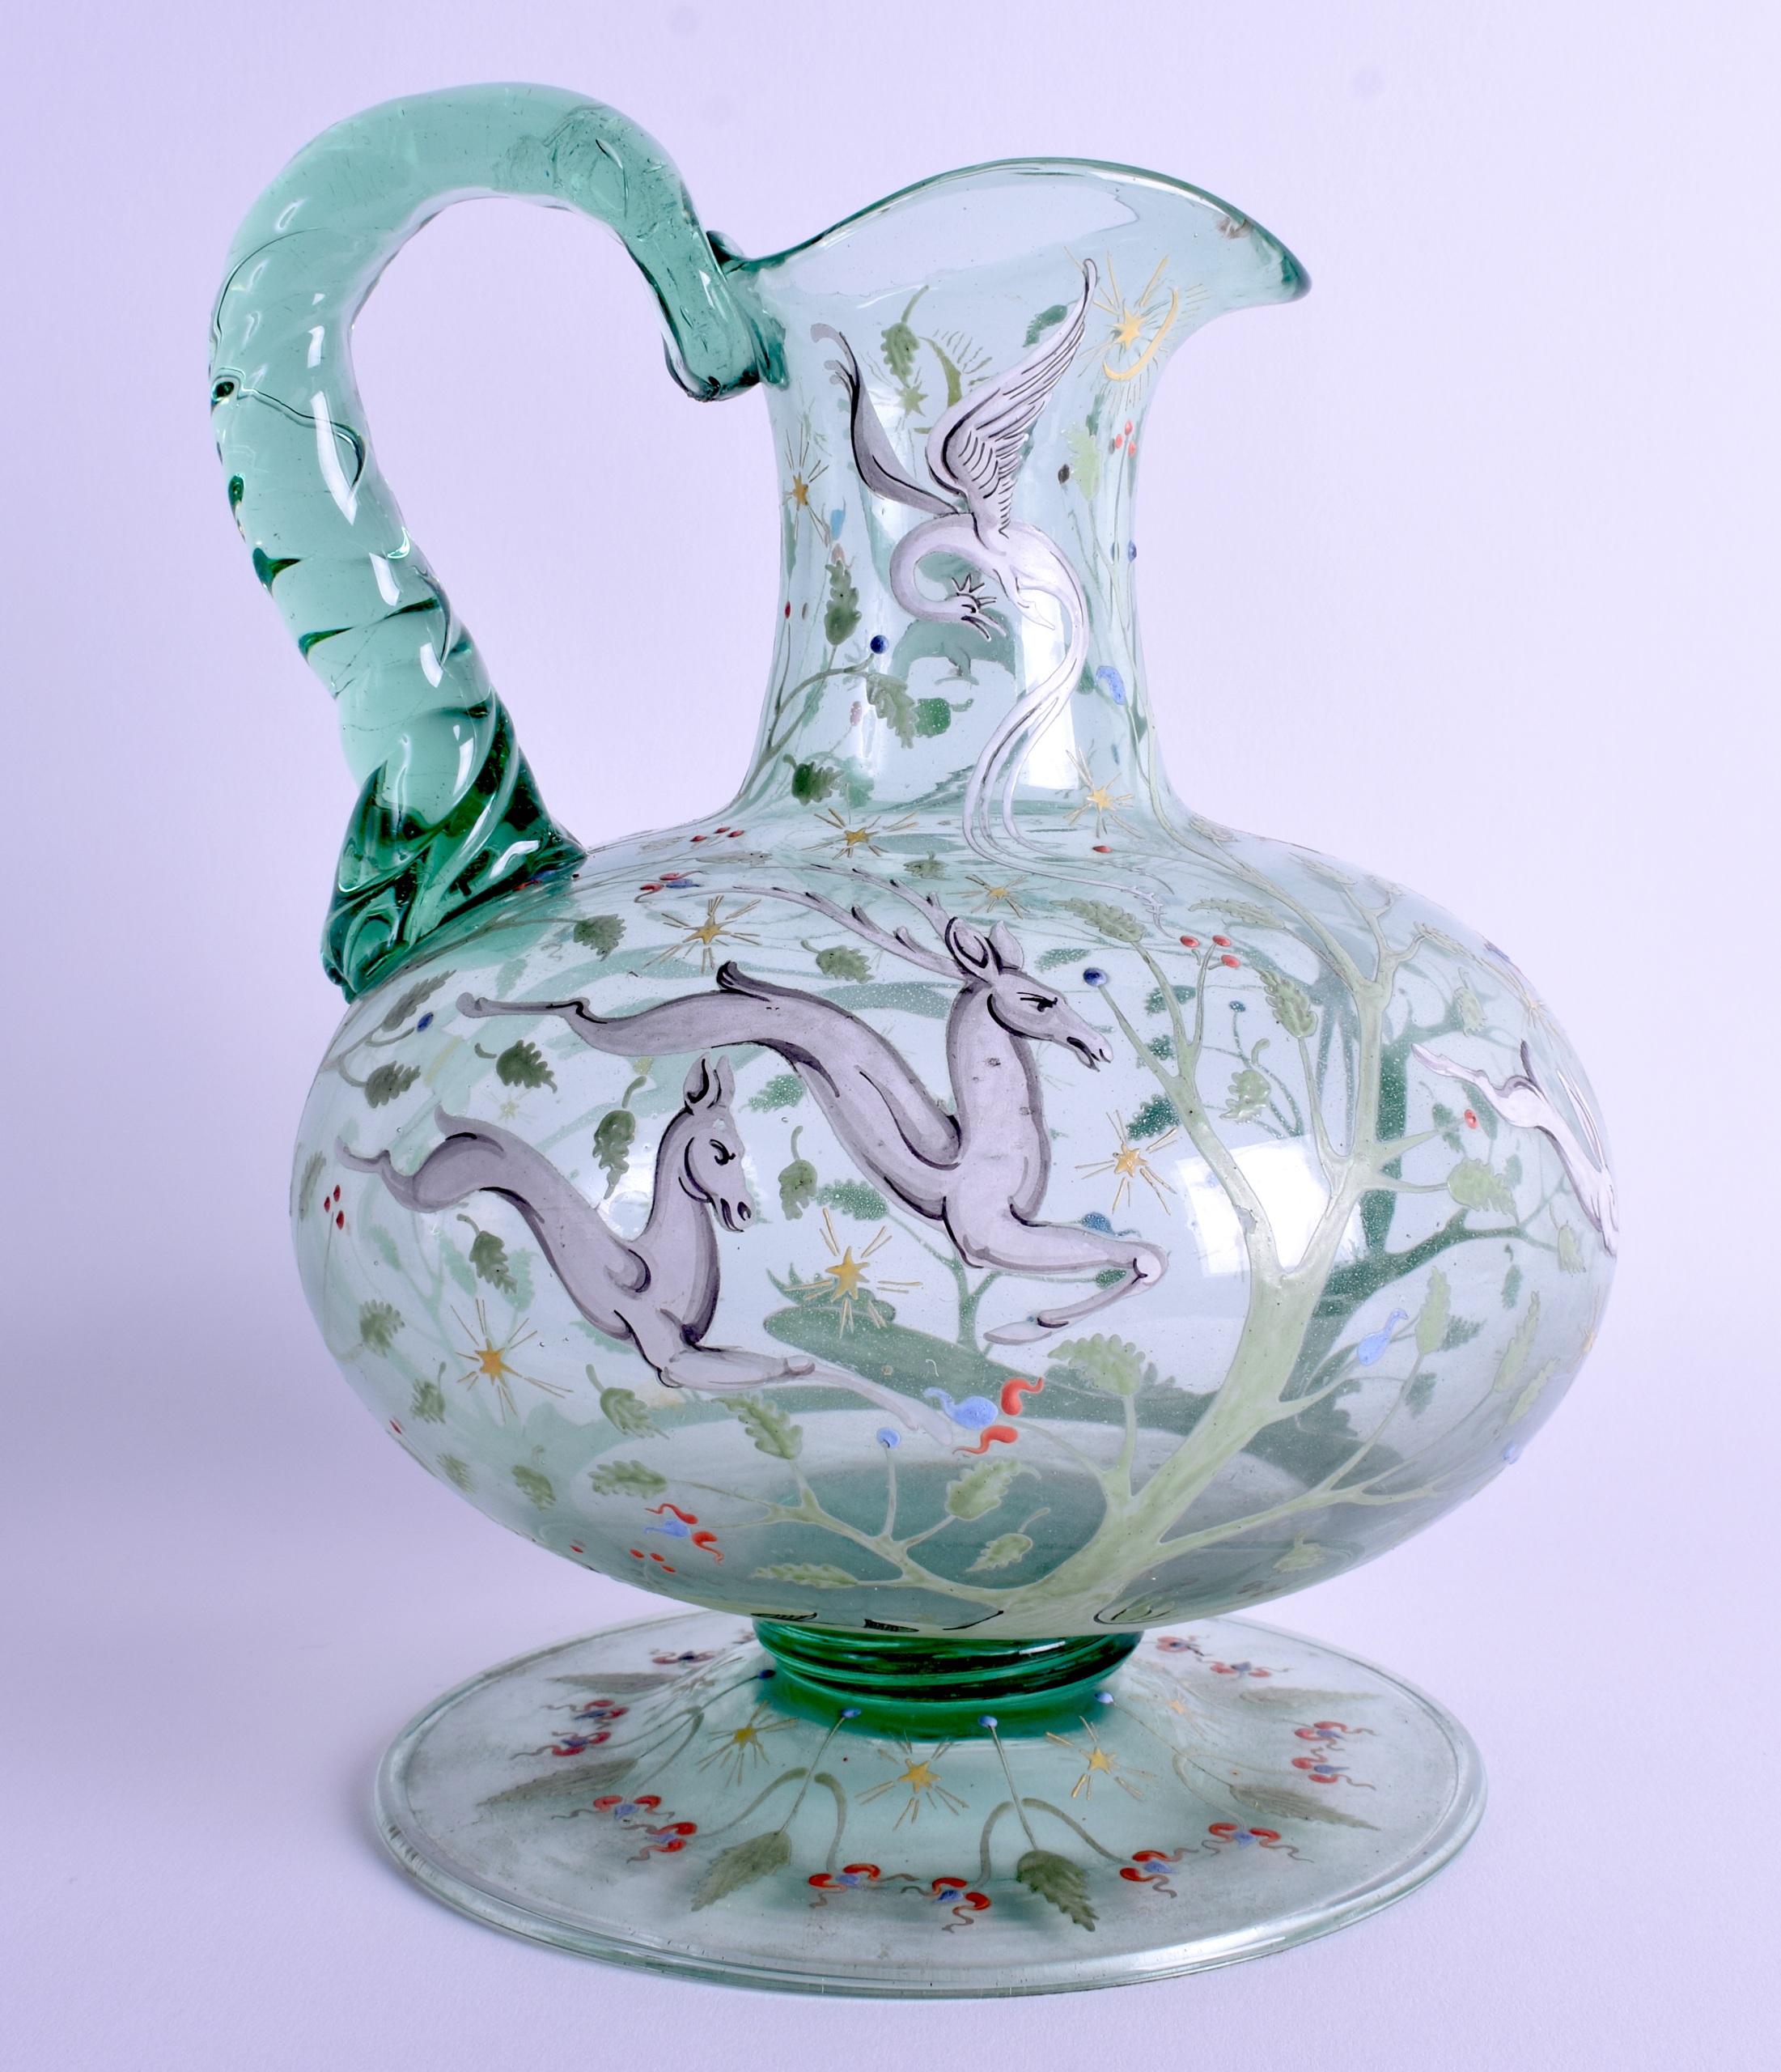 AN ART NOUVEAU GERMAN ENAMELLED GLASS PITCHER C1890 Attributed to Fritz Heckert, enamelled in the Is - Bild 2 aus 2